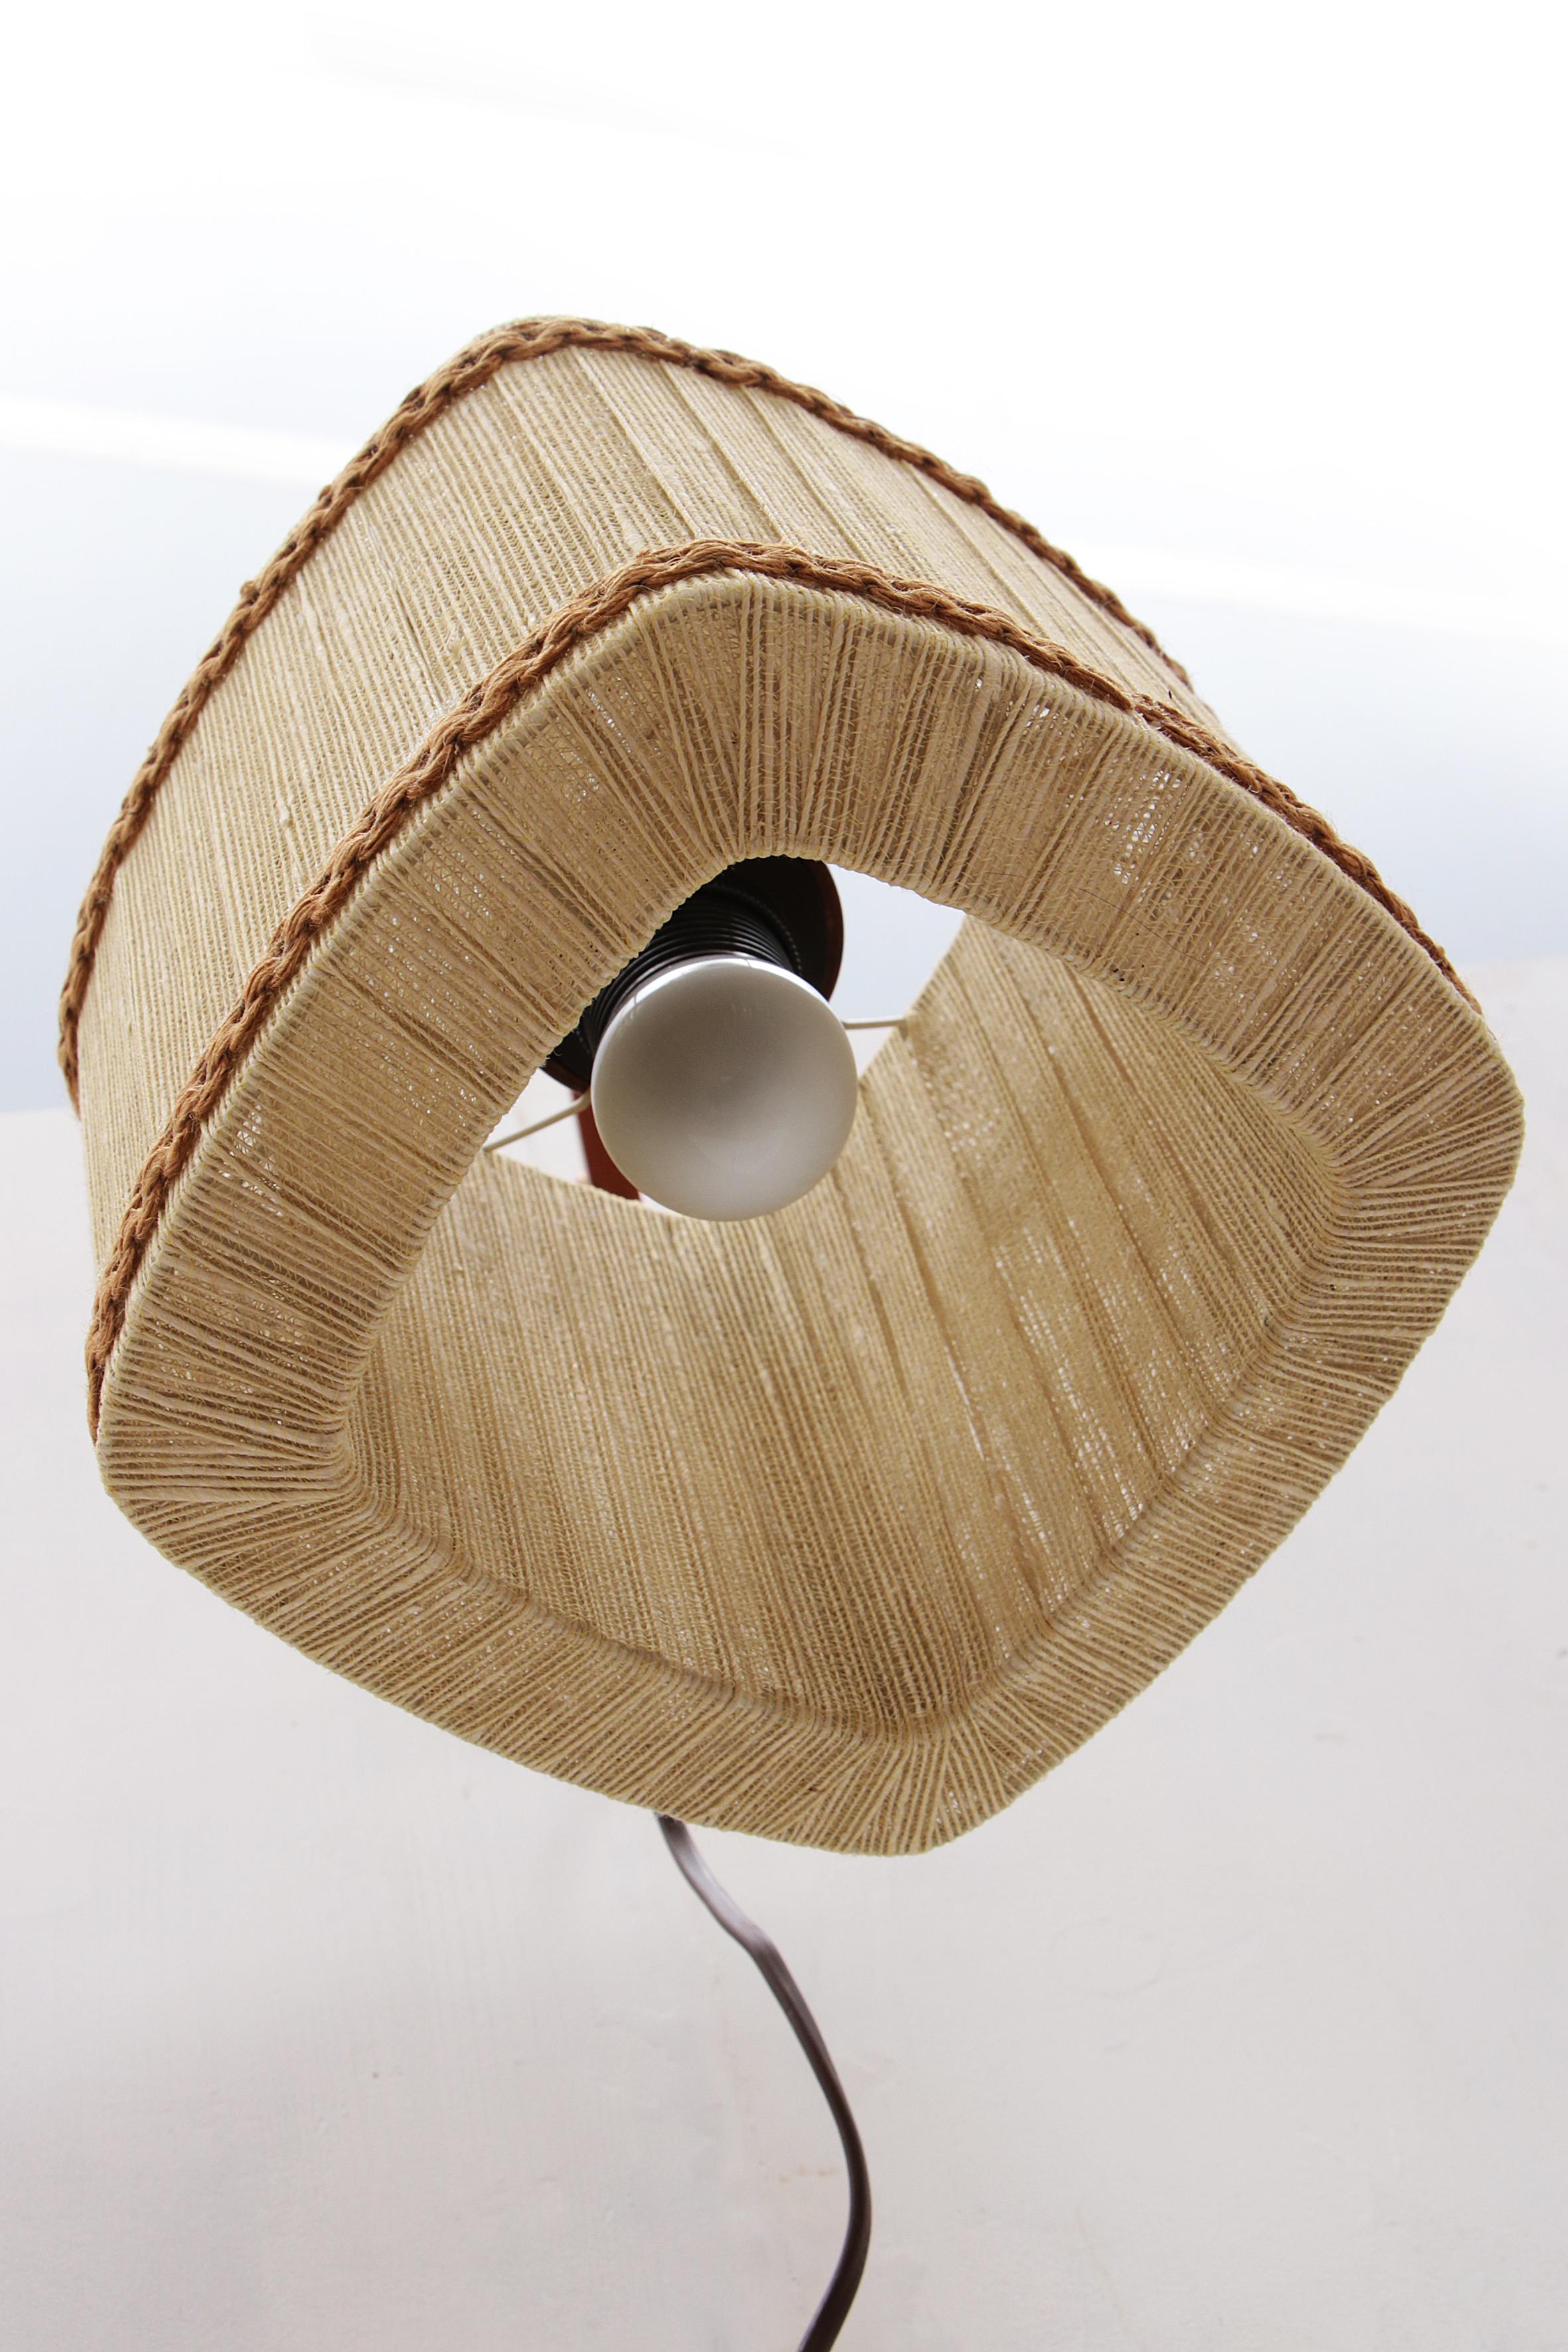 Vintage Wall hanging lamp made of rope and teak, 1960s Sweden. 4